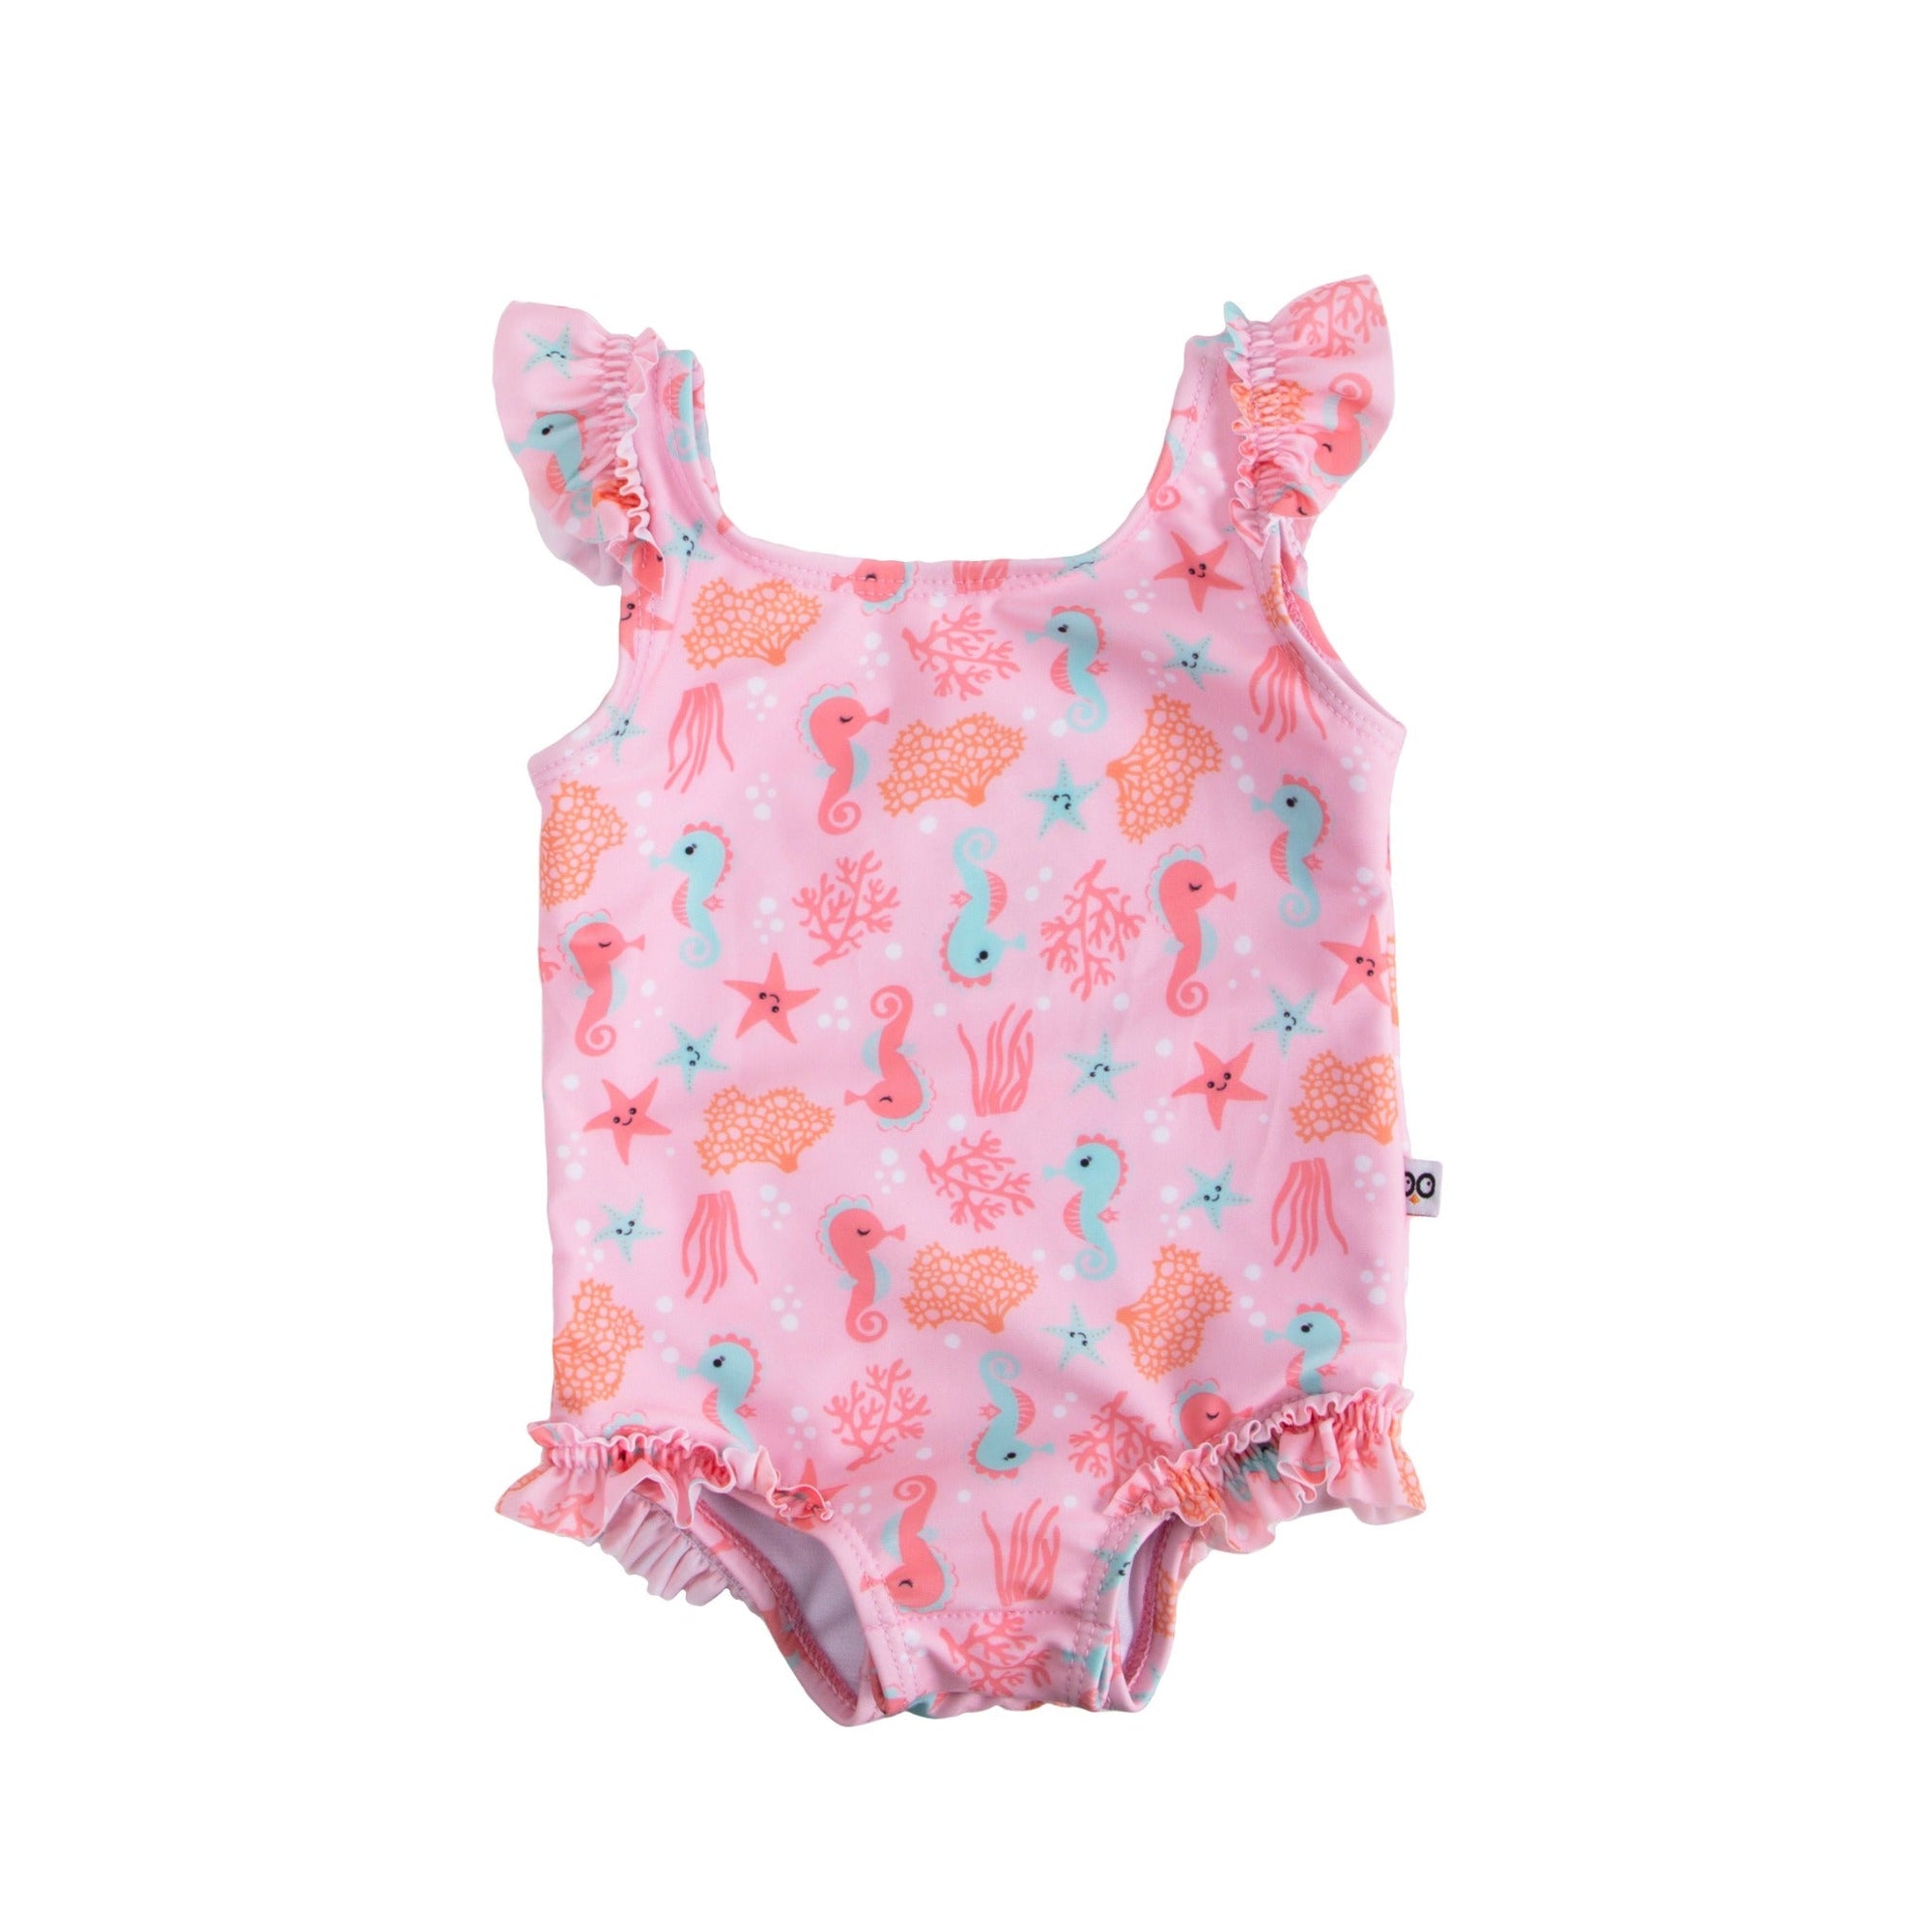 Baby Ruffled One Piece Swimsuit - Seahorse